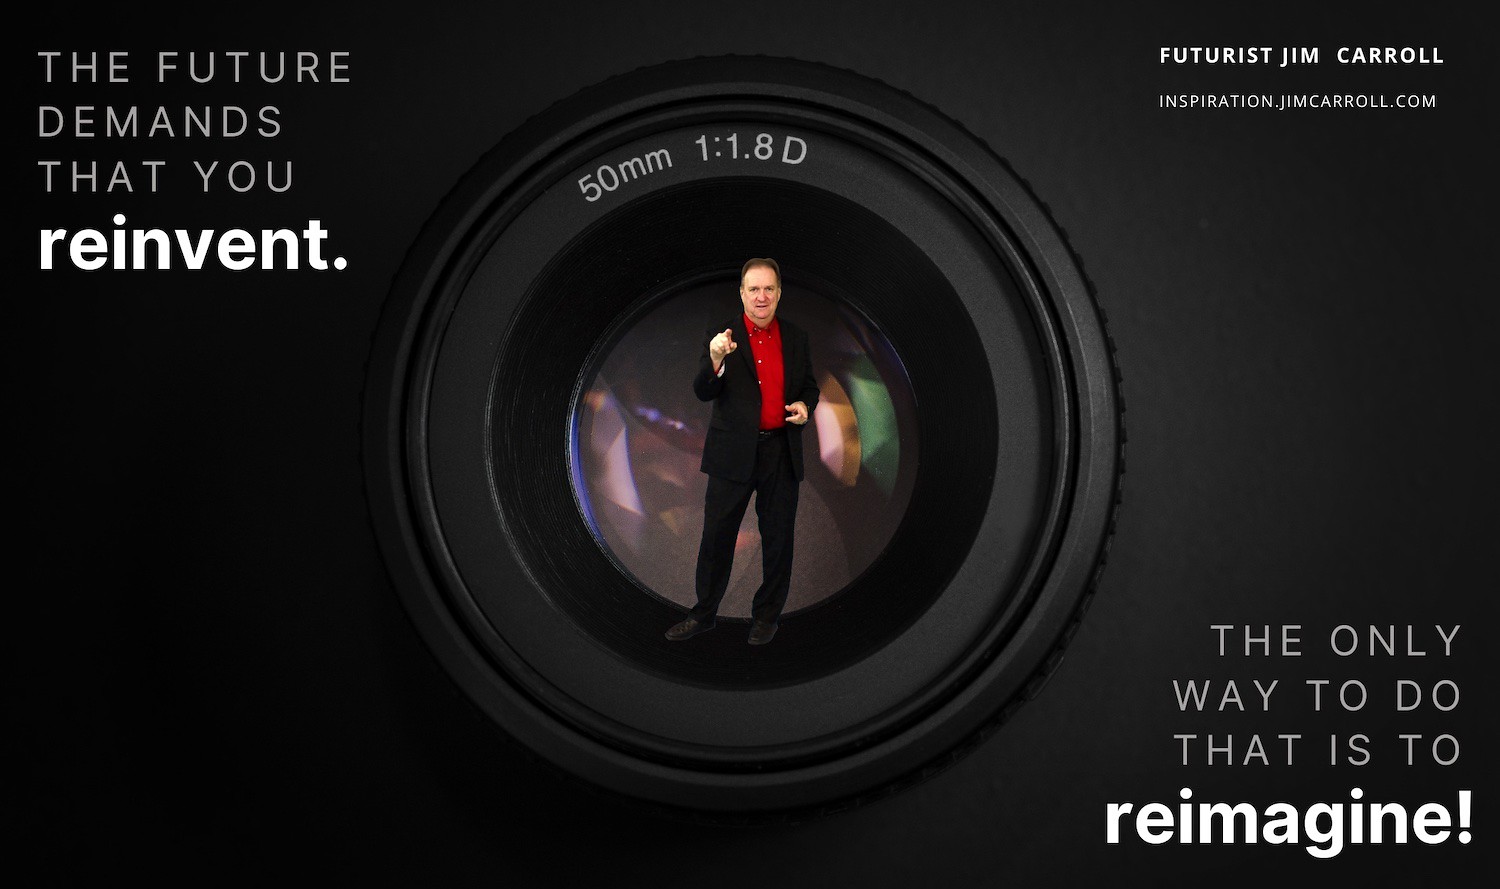 "The future demands that you reinvent. The only way to do that is to reimagine!" - Futurist Jim Carroll